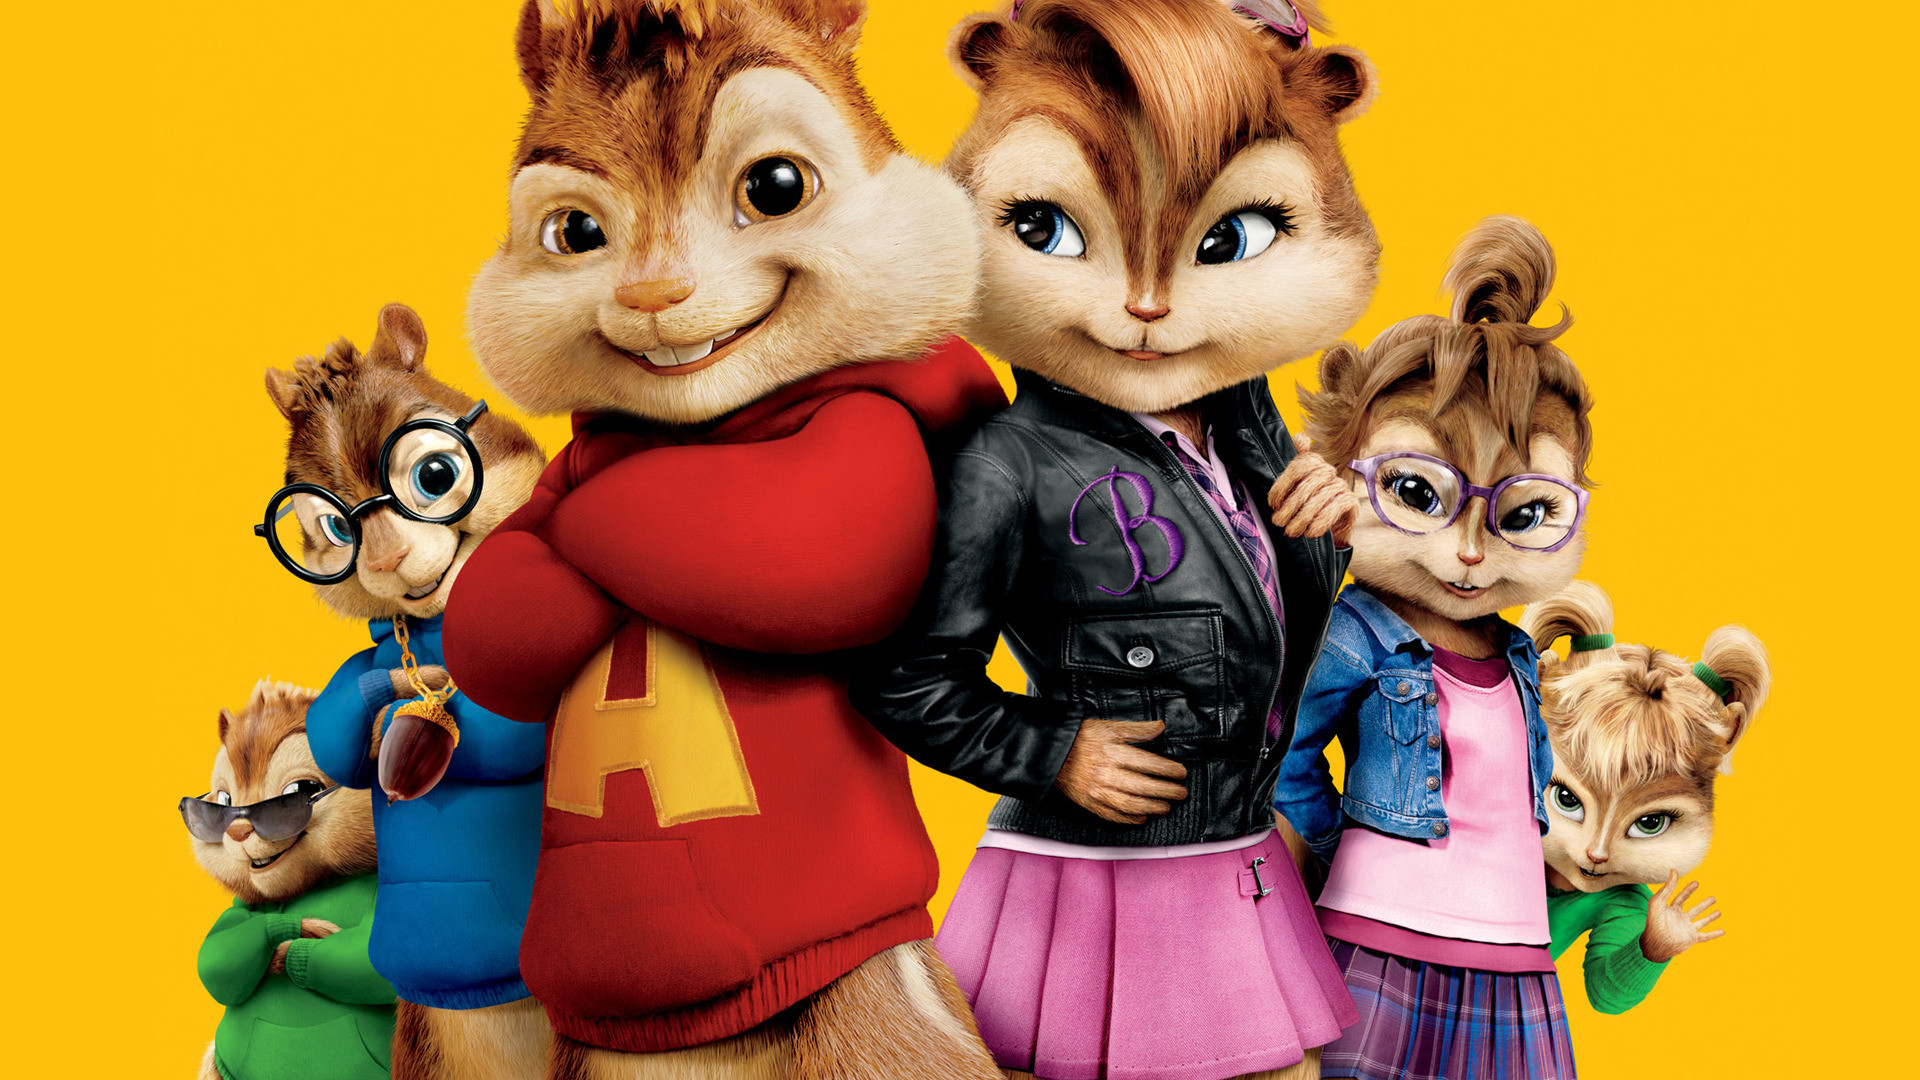 Movie Alvin and the Chipmunks: The Squeakquel HD Wallpaper | Background Image